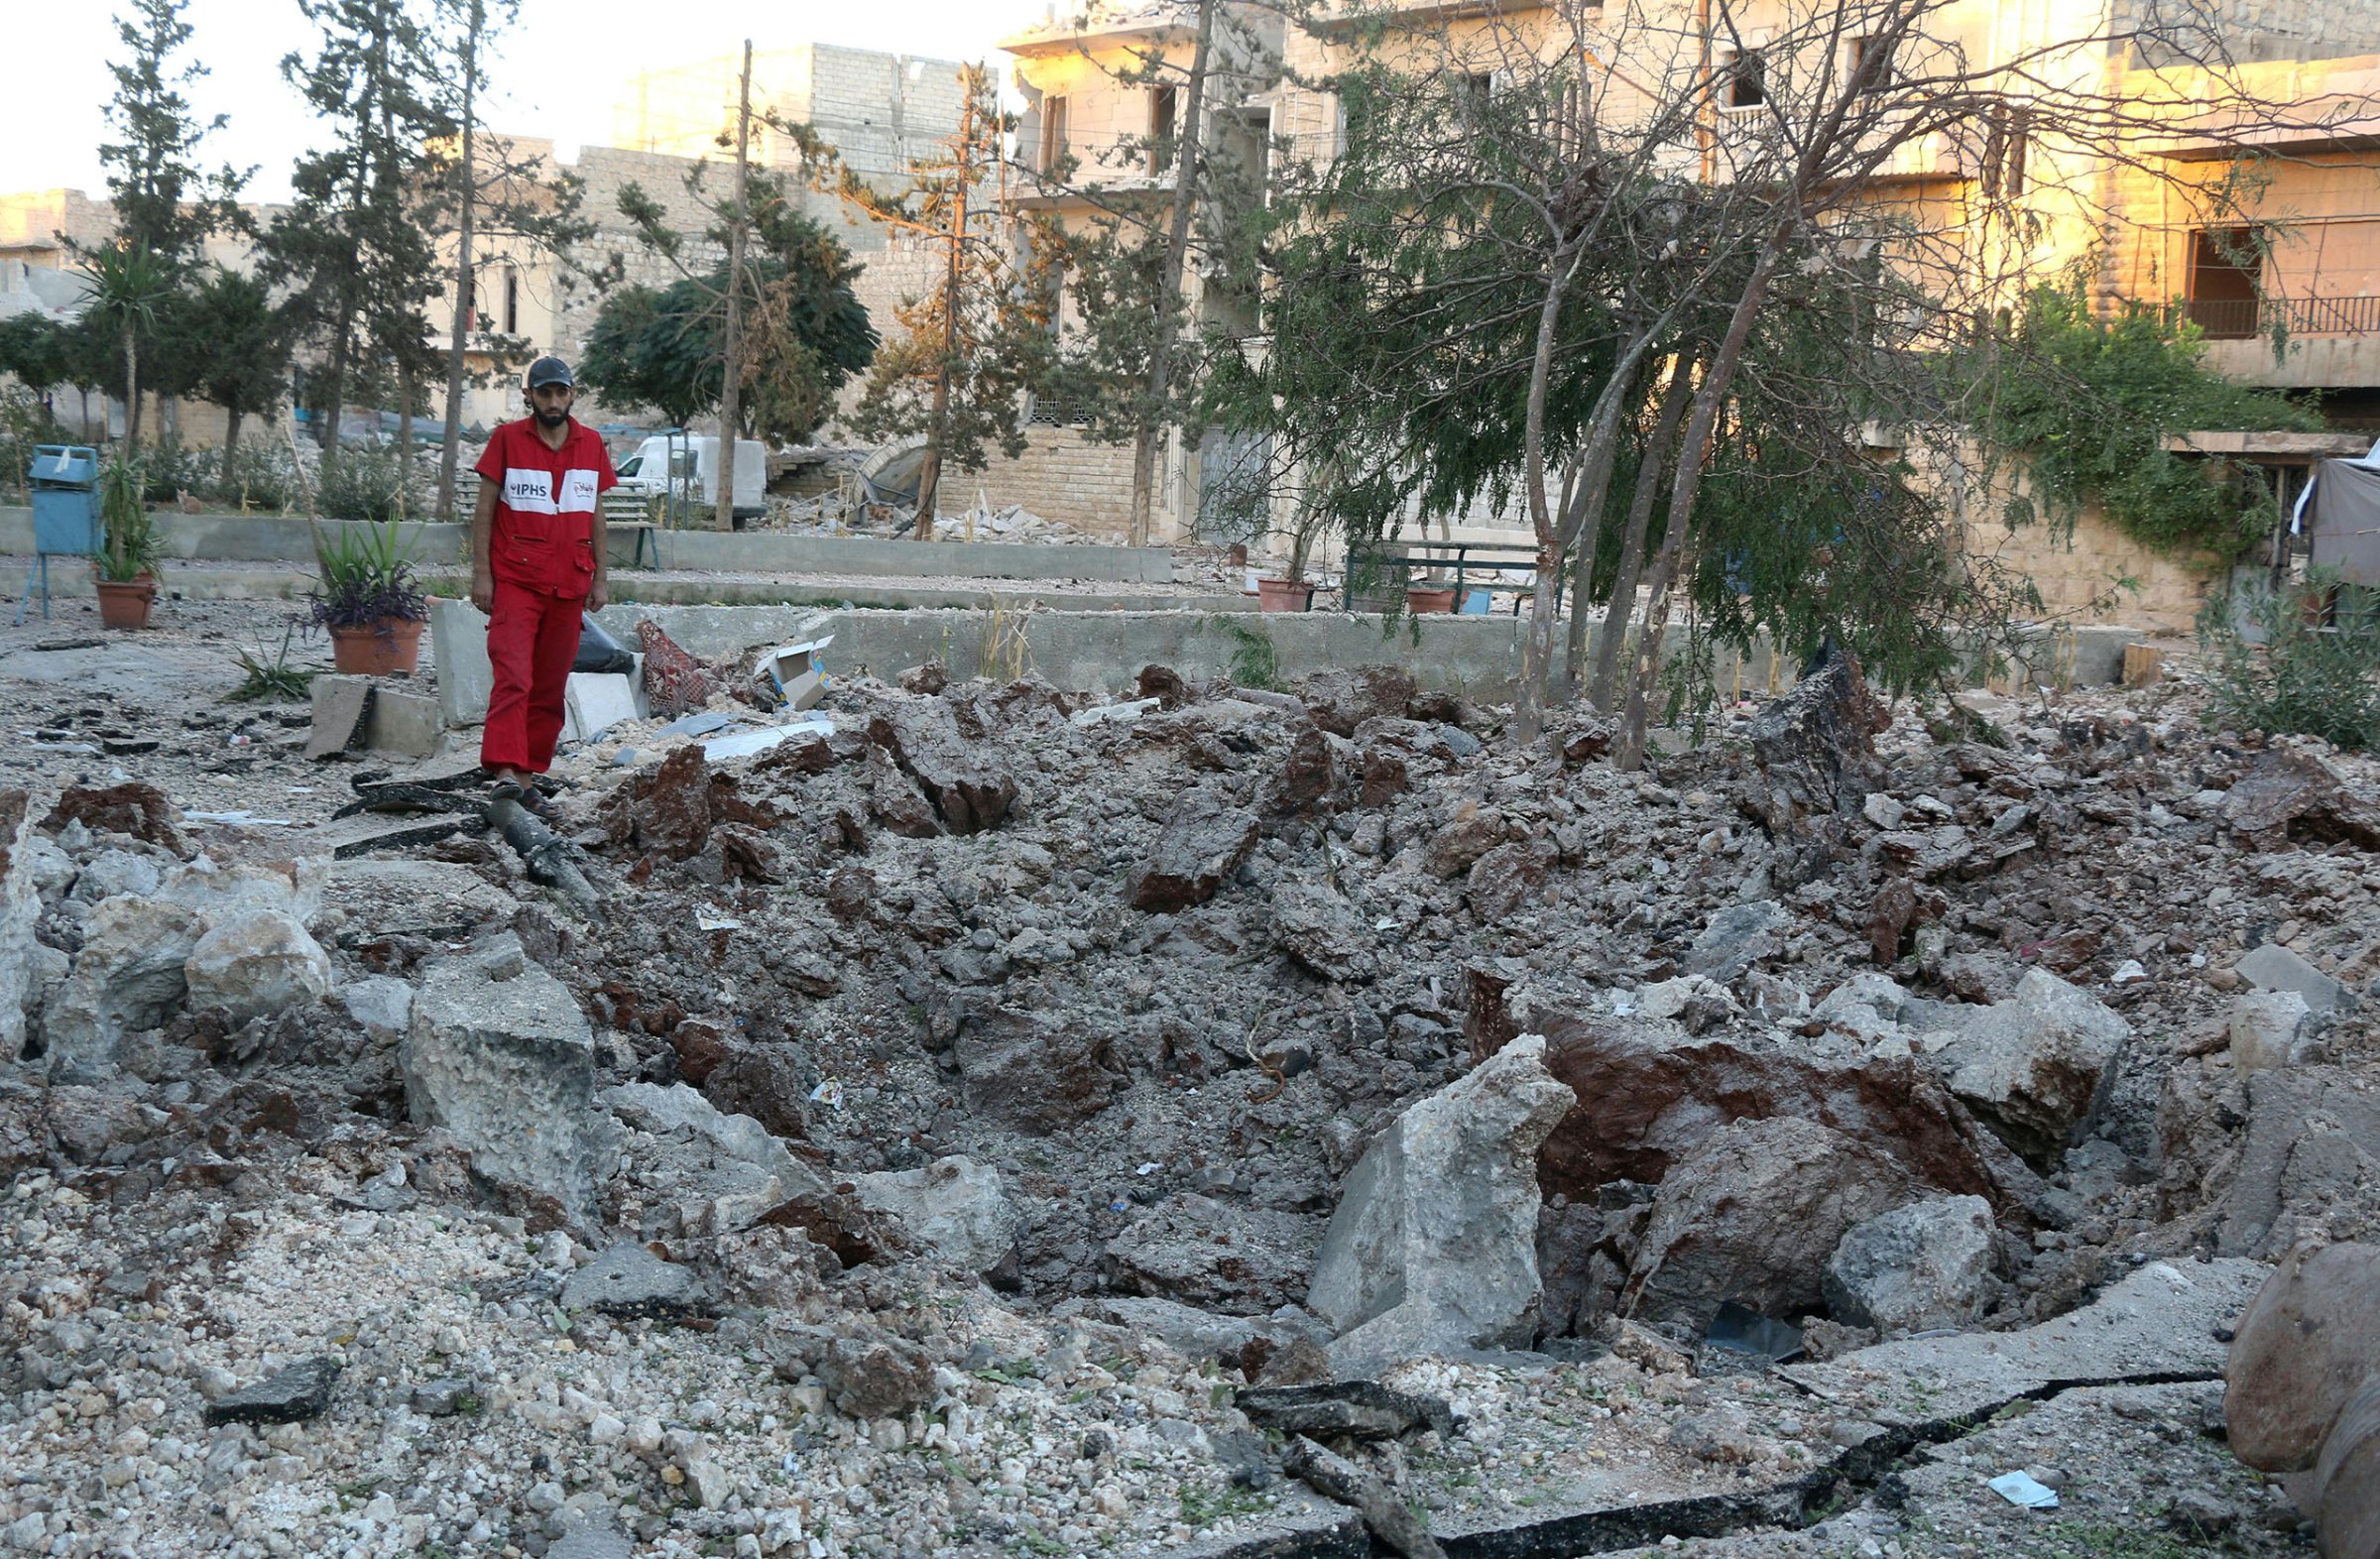 A Syrian medical staff member inspects the damage at the site of a medical facility after it was reportedly hit by Syrian regime barrel bombs on Oct. 1, 2016, in the rebel-held neighbourhood of al-Sakhour, in the northern city of Aleppo.